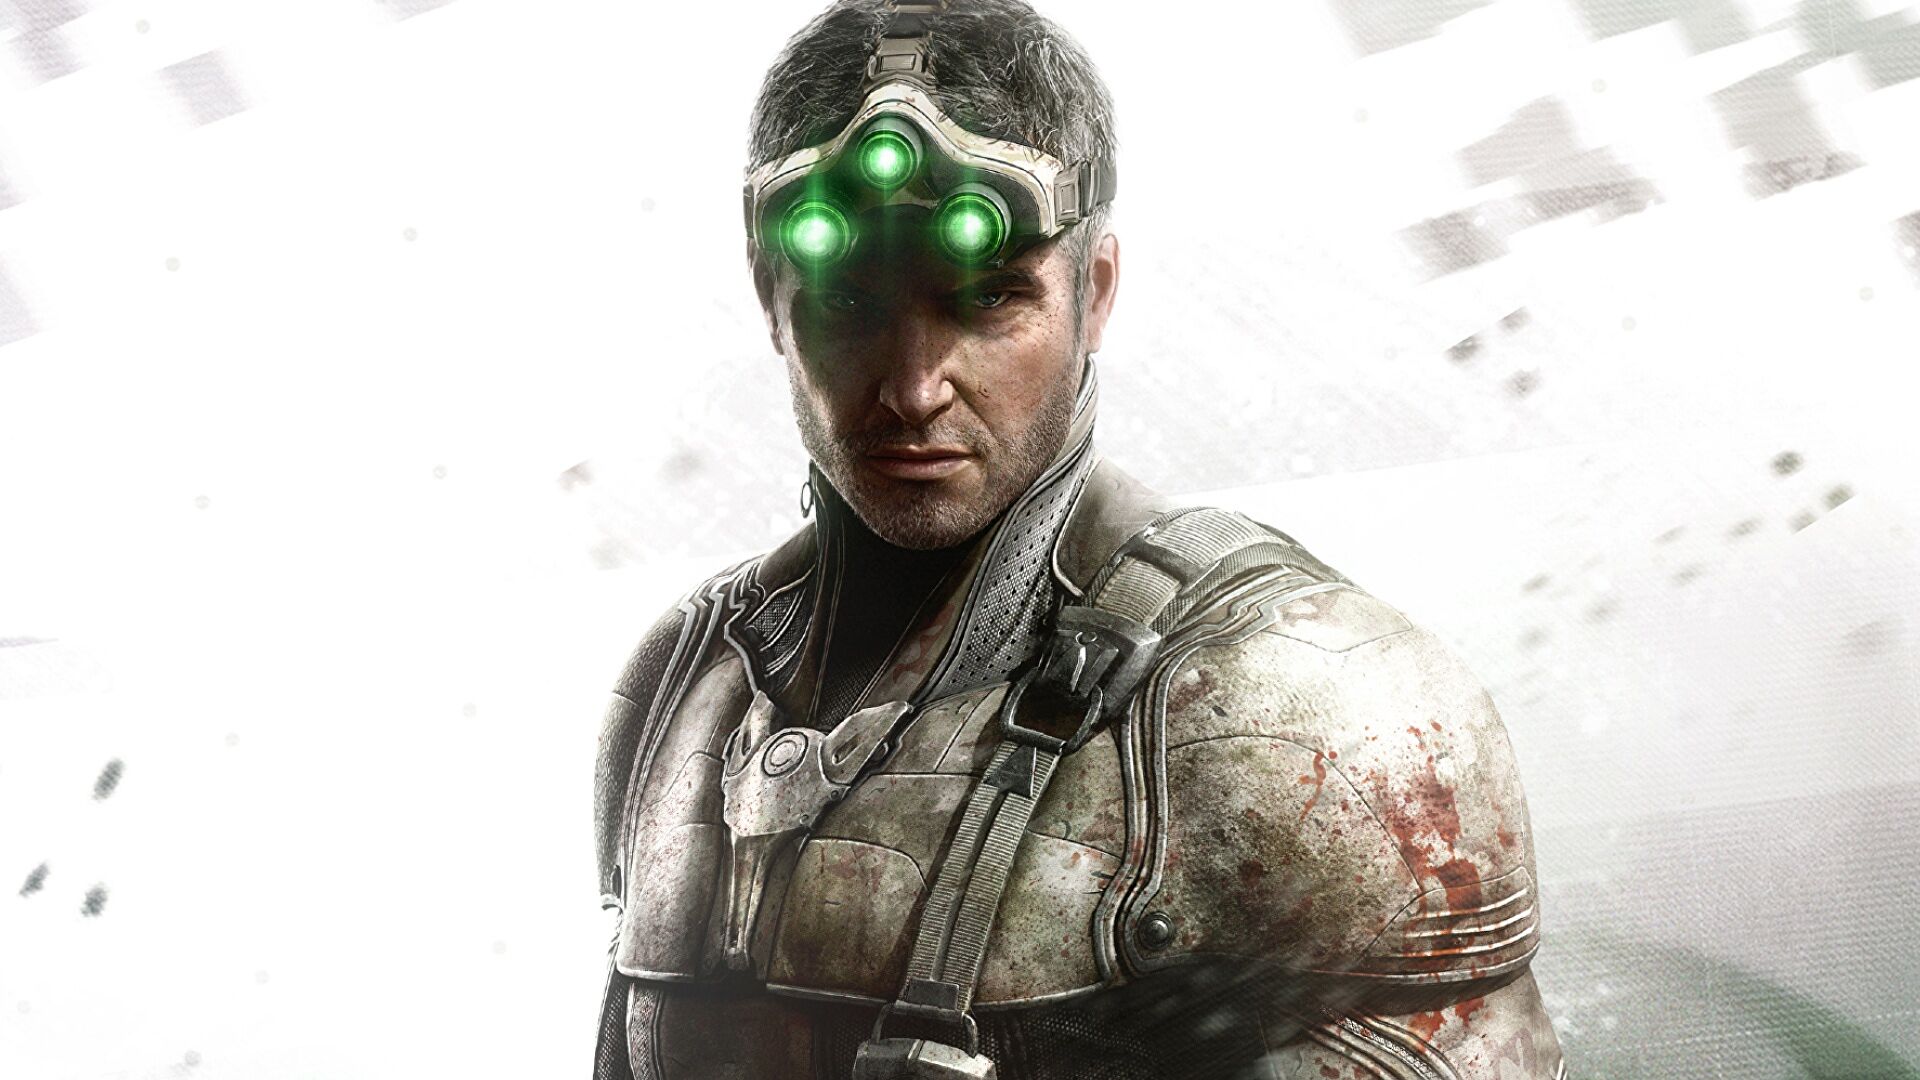 ubisoft's-splinter-cell-remake-will-be-“rewriting-and-updating”-the-story-for-today's-players